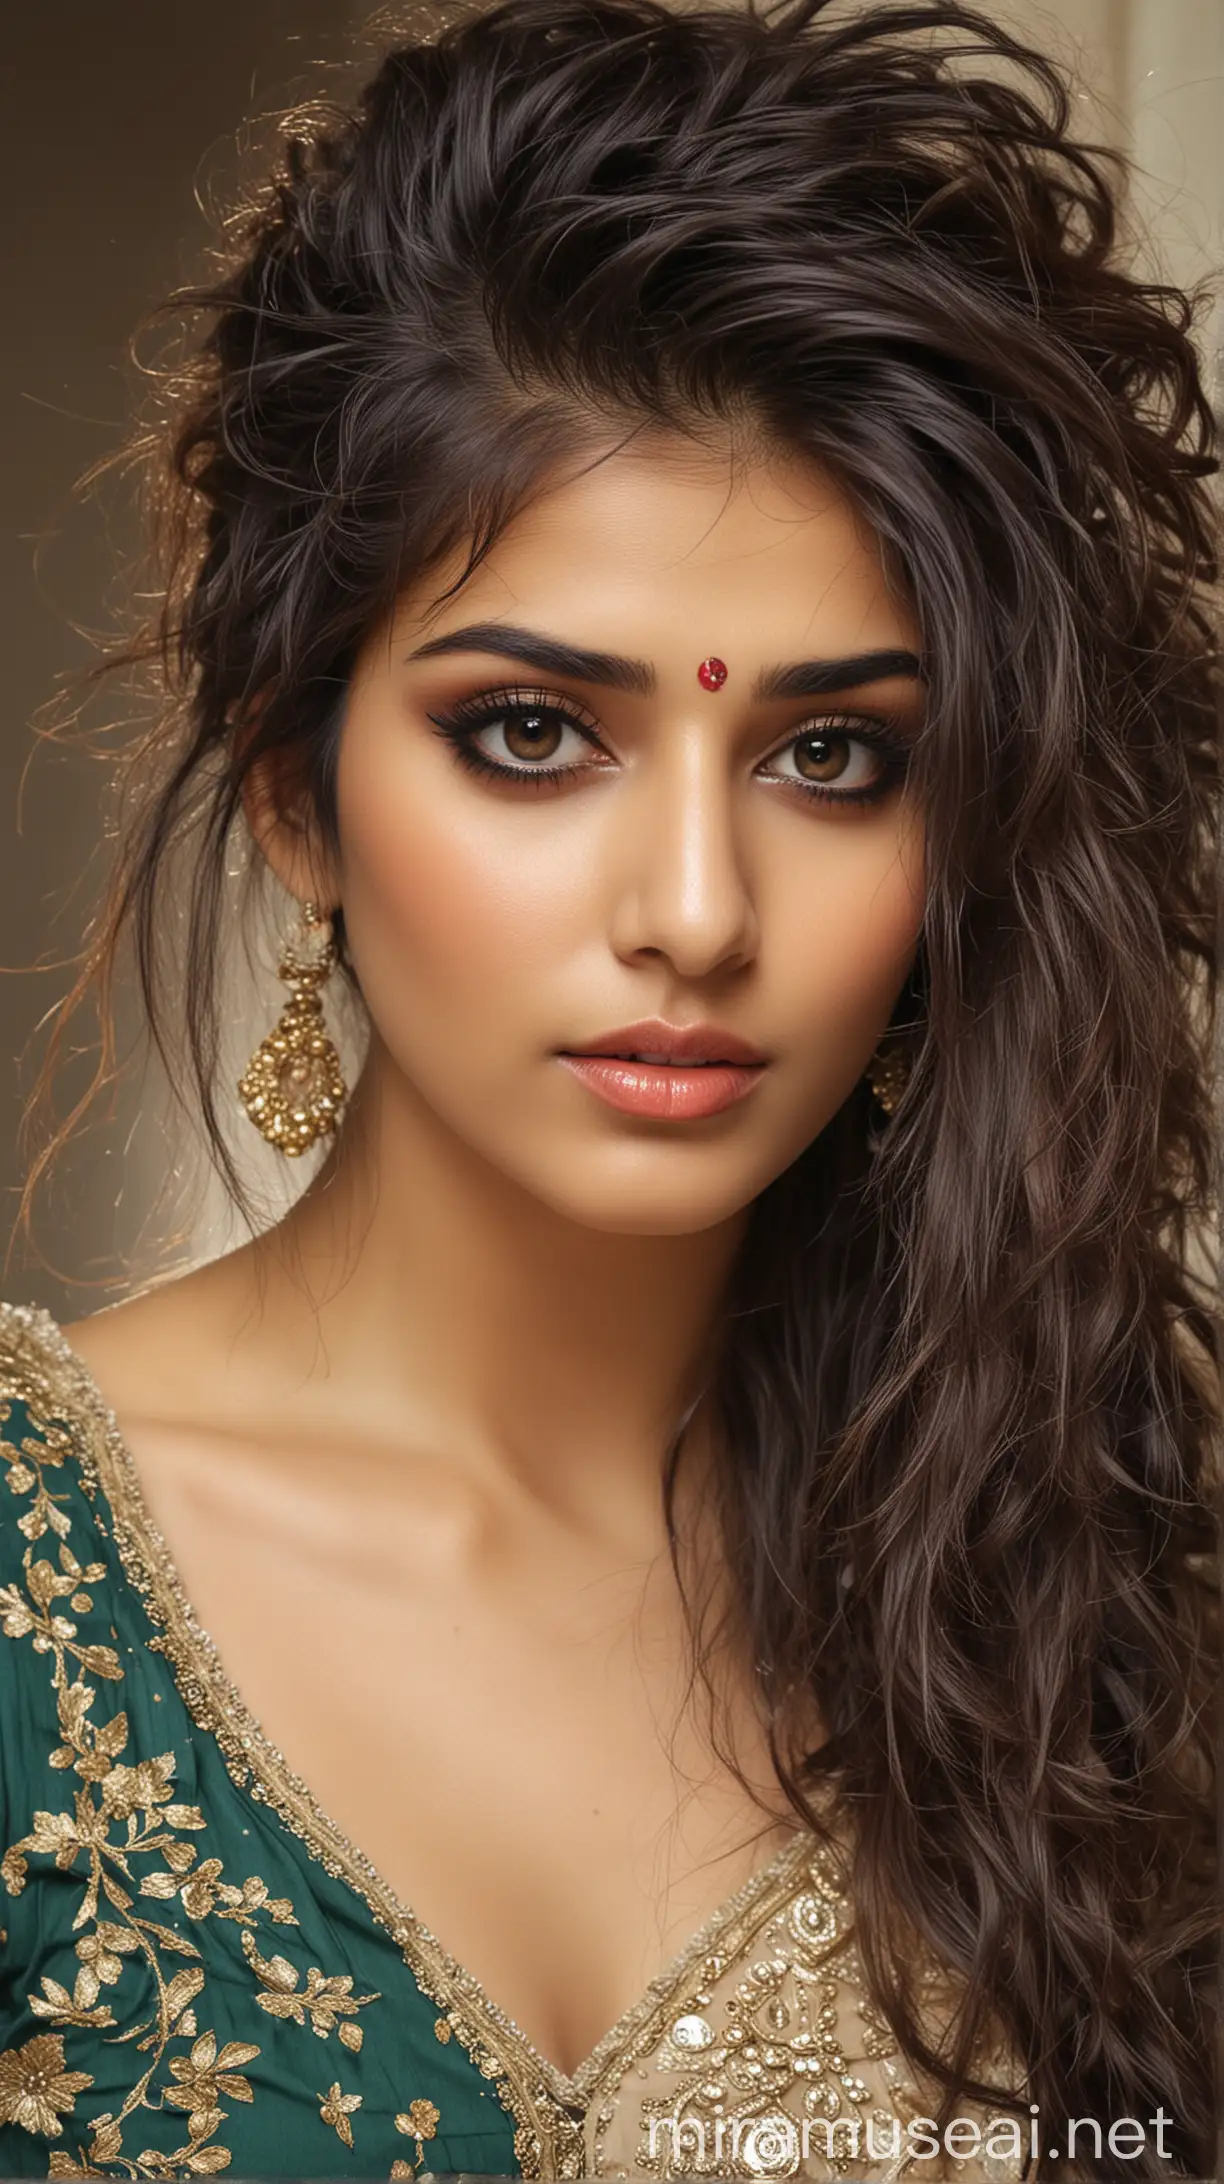 Exquisite Pakistani Model with Indian Makeup and Messy Hair